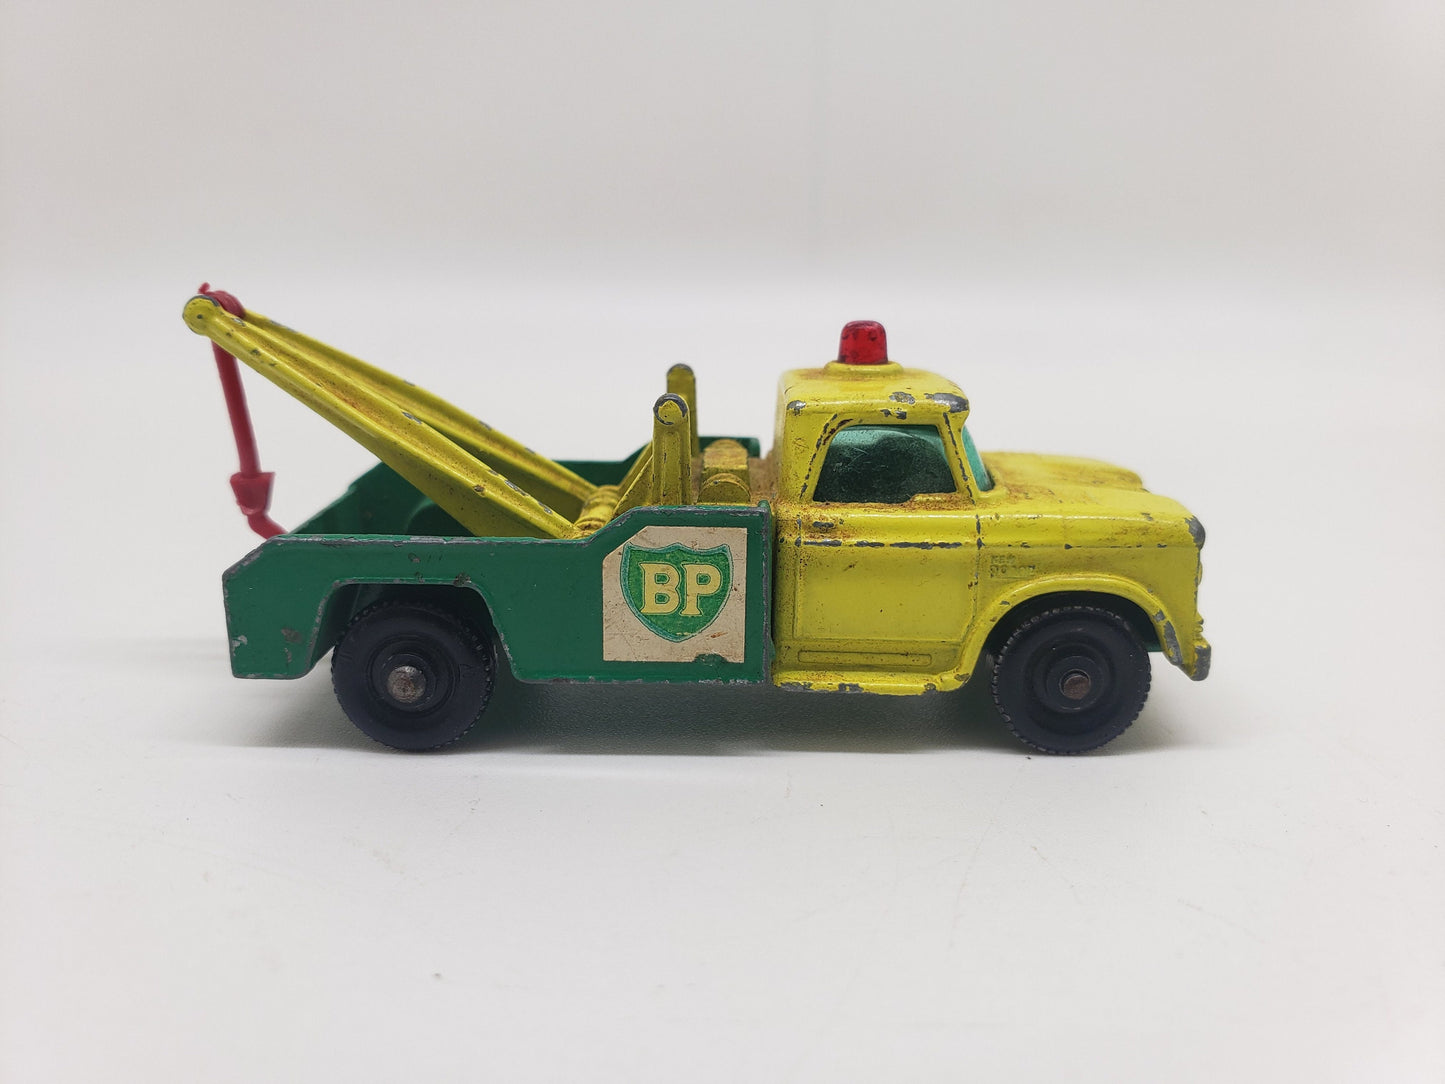 Matchbox 1965 Dodge Wreck Truck Yellow Collectable Scale Model Replica Toy Car Perfect Birthday Gift